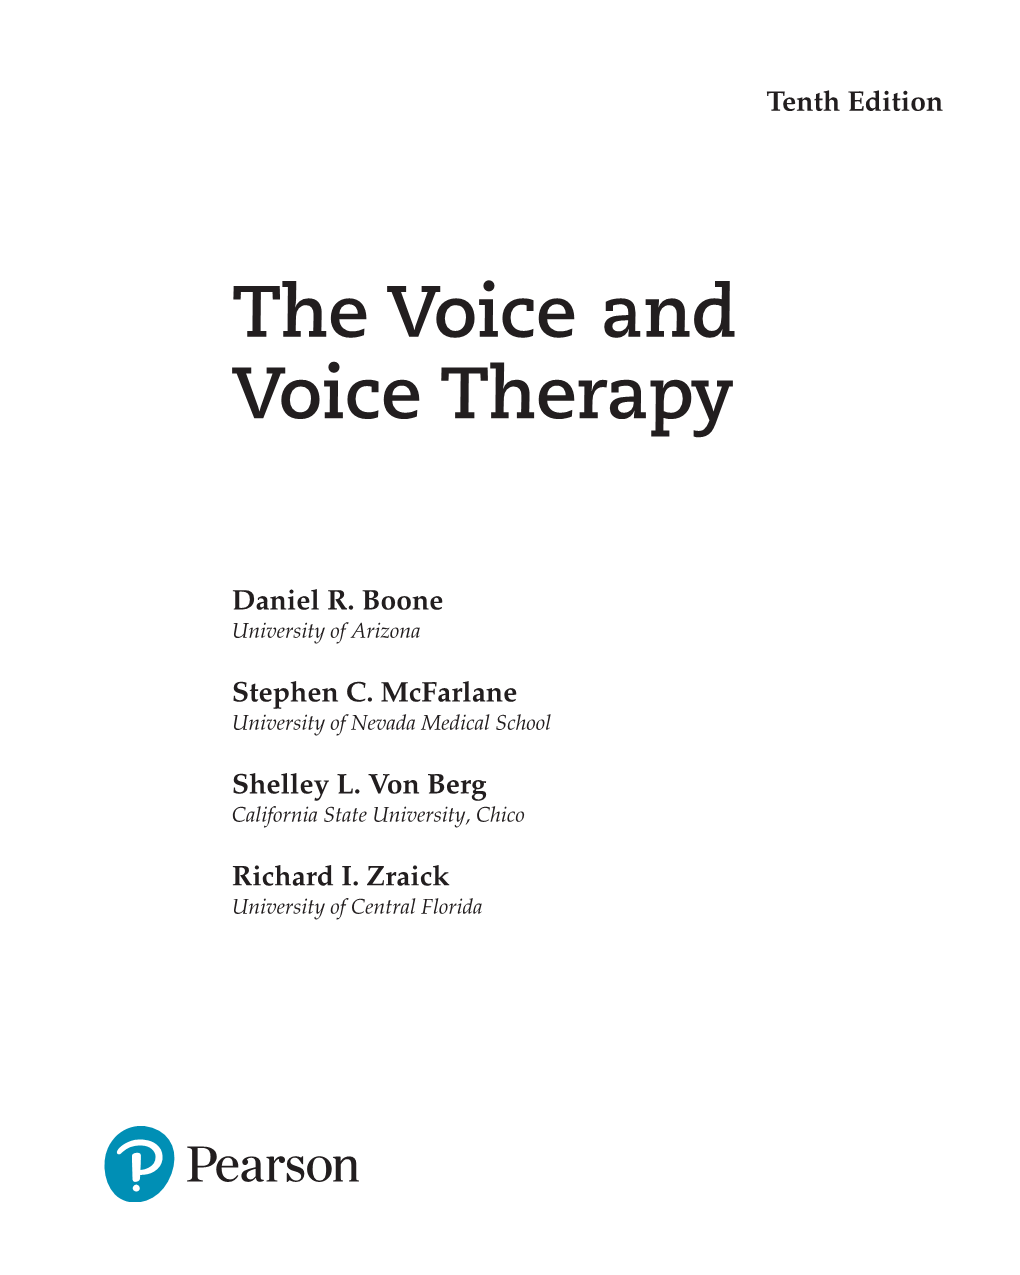 The Voice and Voice Therapy